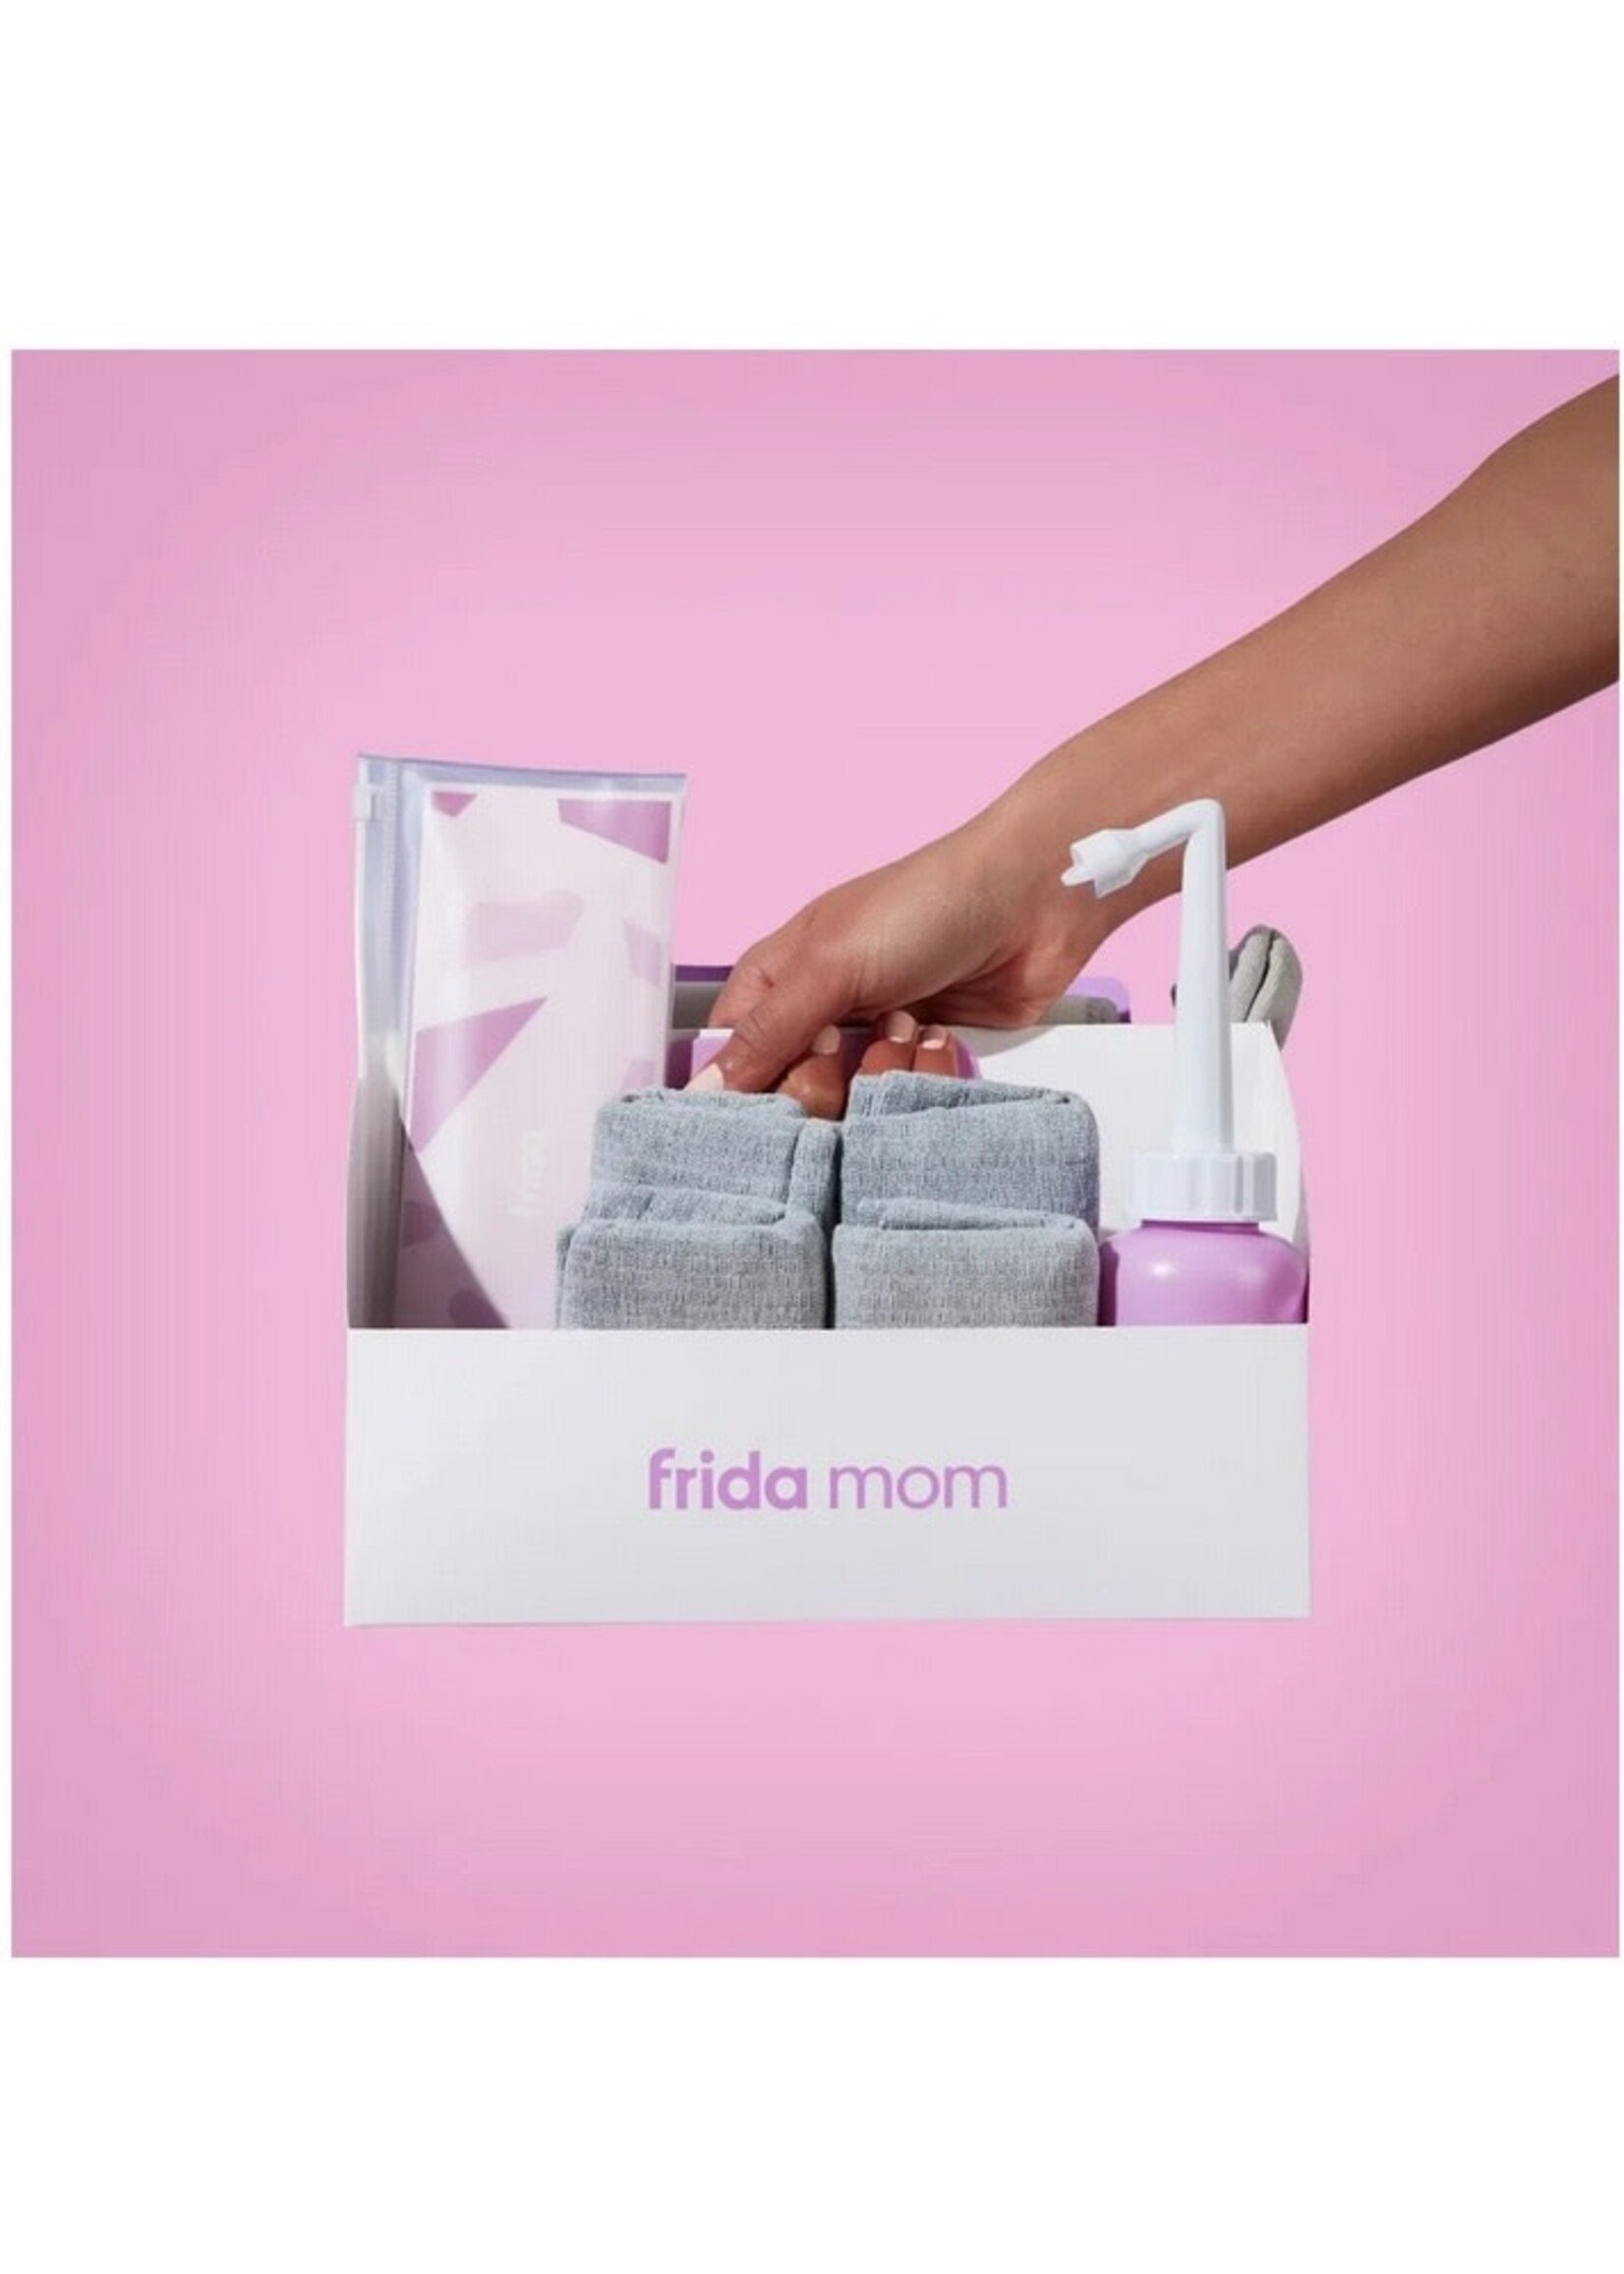 Opening and comparing the Frida Mom Postpartum recovery essential kit